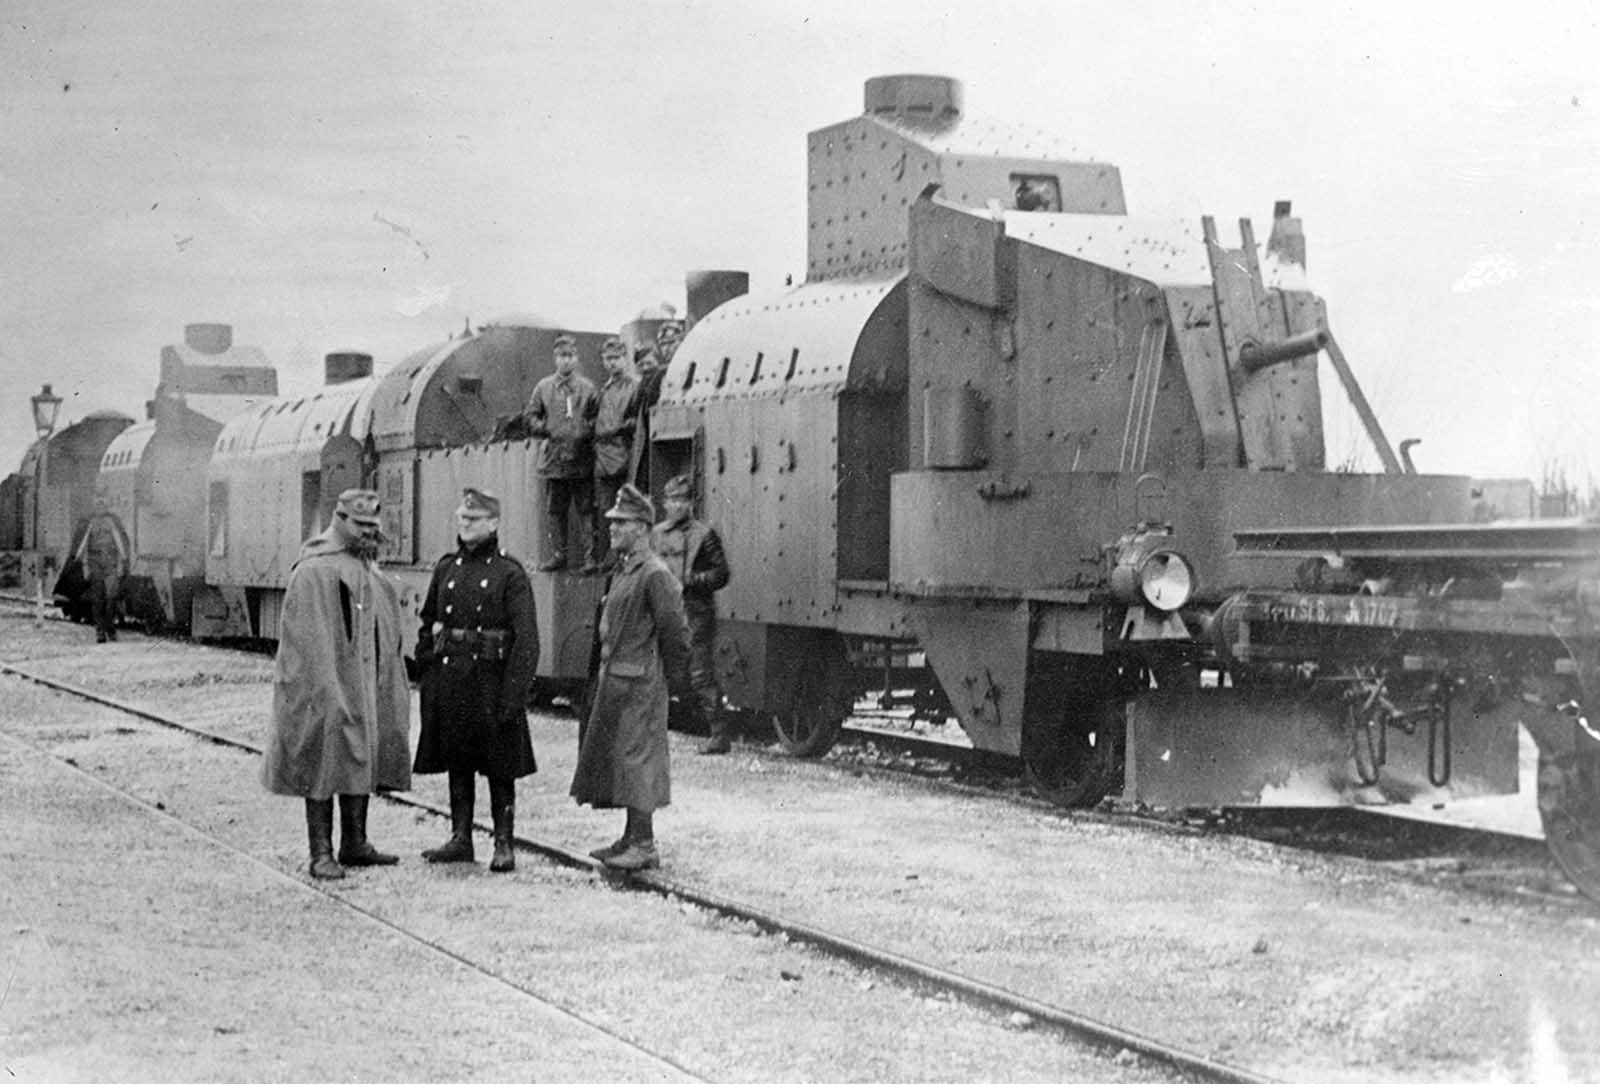 An Austrian armored train in Galicia, ca, 1915. Adding armor to trains dates back to the American Civil War, used as a way to safely move weapons and personnel through hostile territory